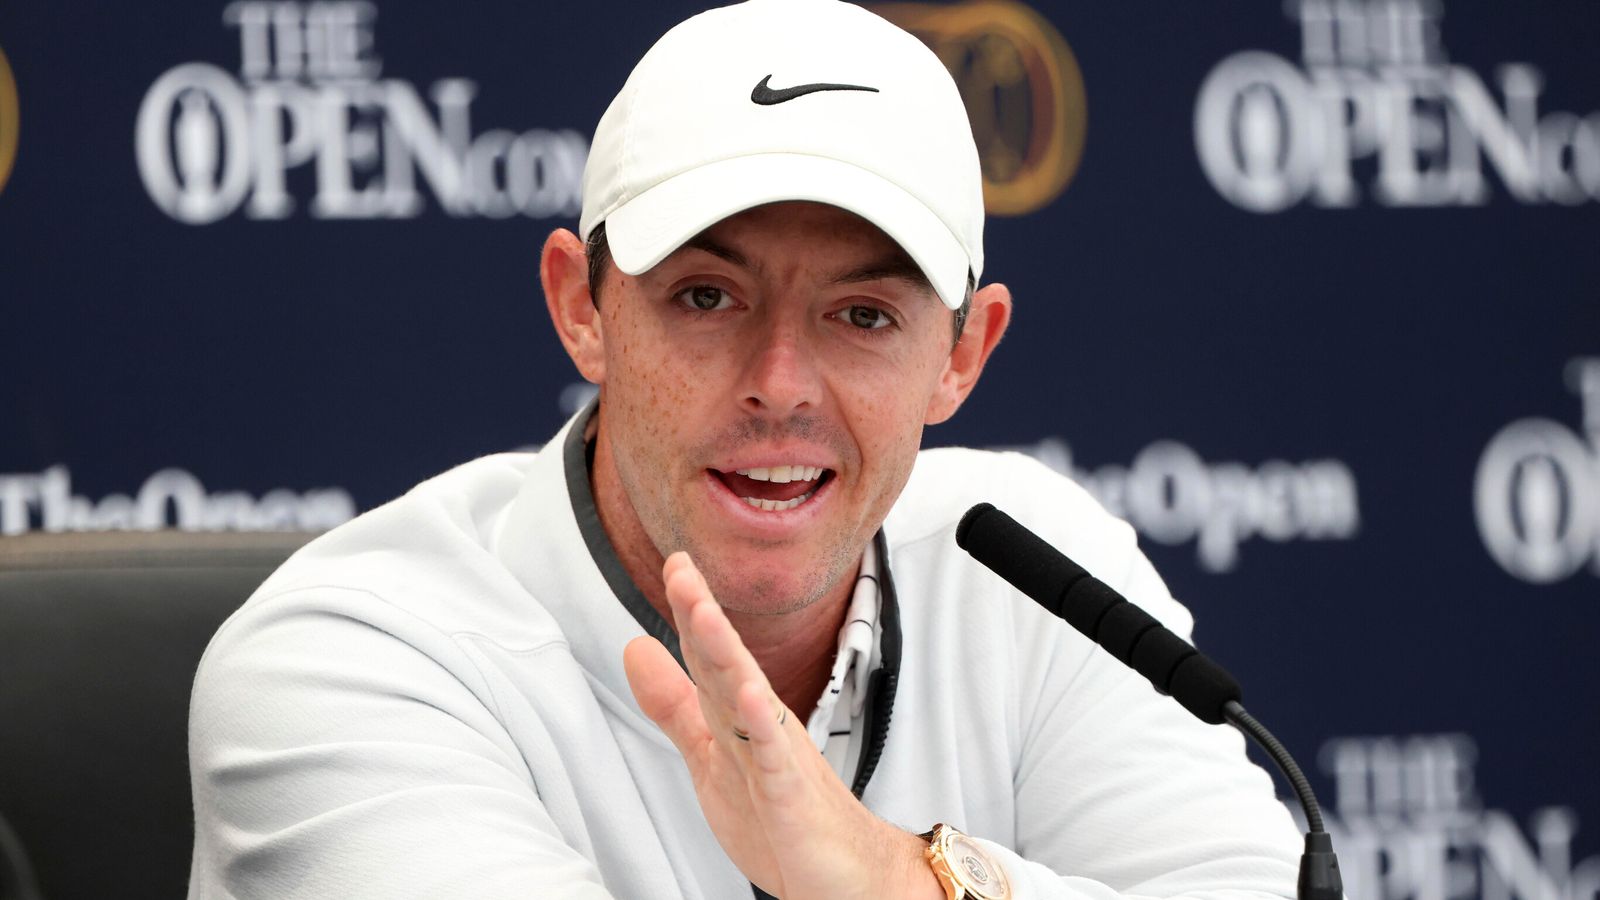 The 150th Open: Rory McIlroy high on confidence and backs Tiger Woods to impress at St Andrews